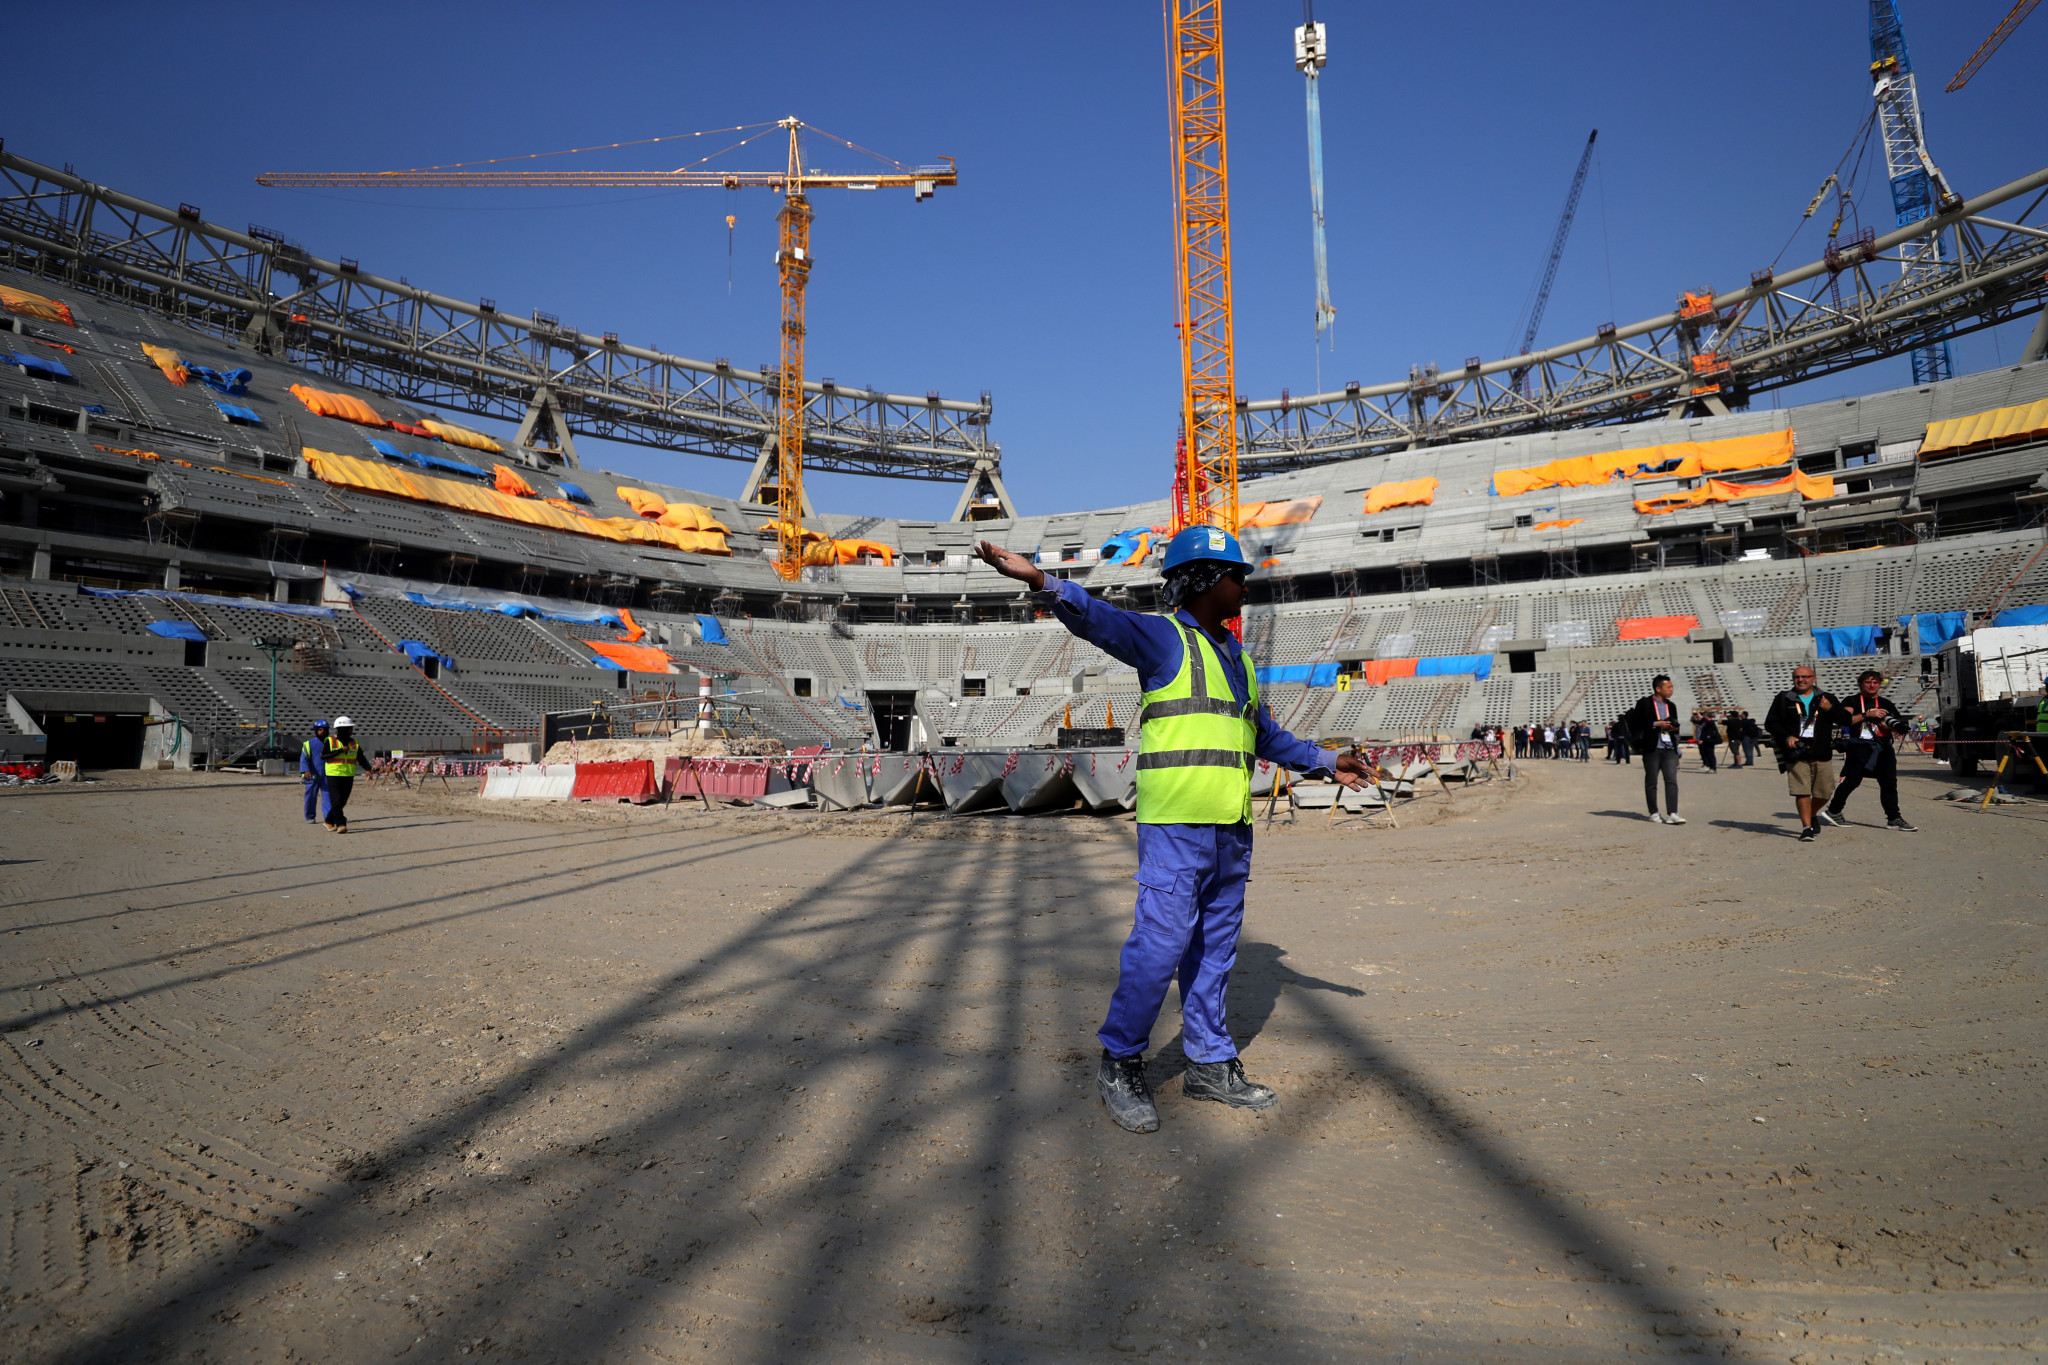 A Human Rights Watch report has found 2022 FIFA World Cup host country Qatar is still falling short on migrant workers’ rights ©Getty Images